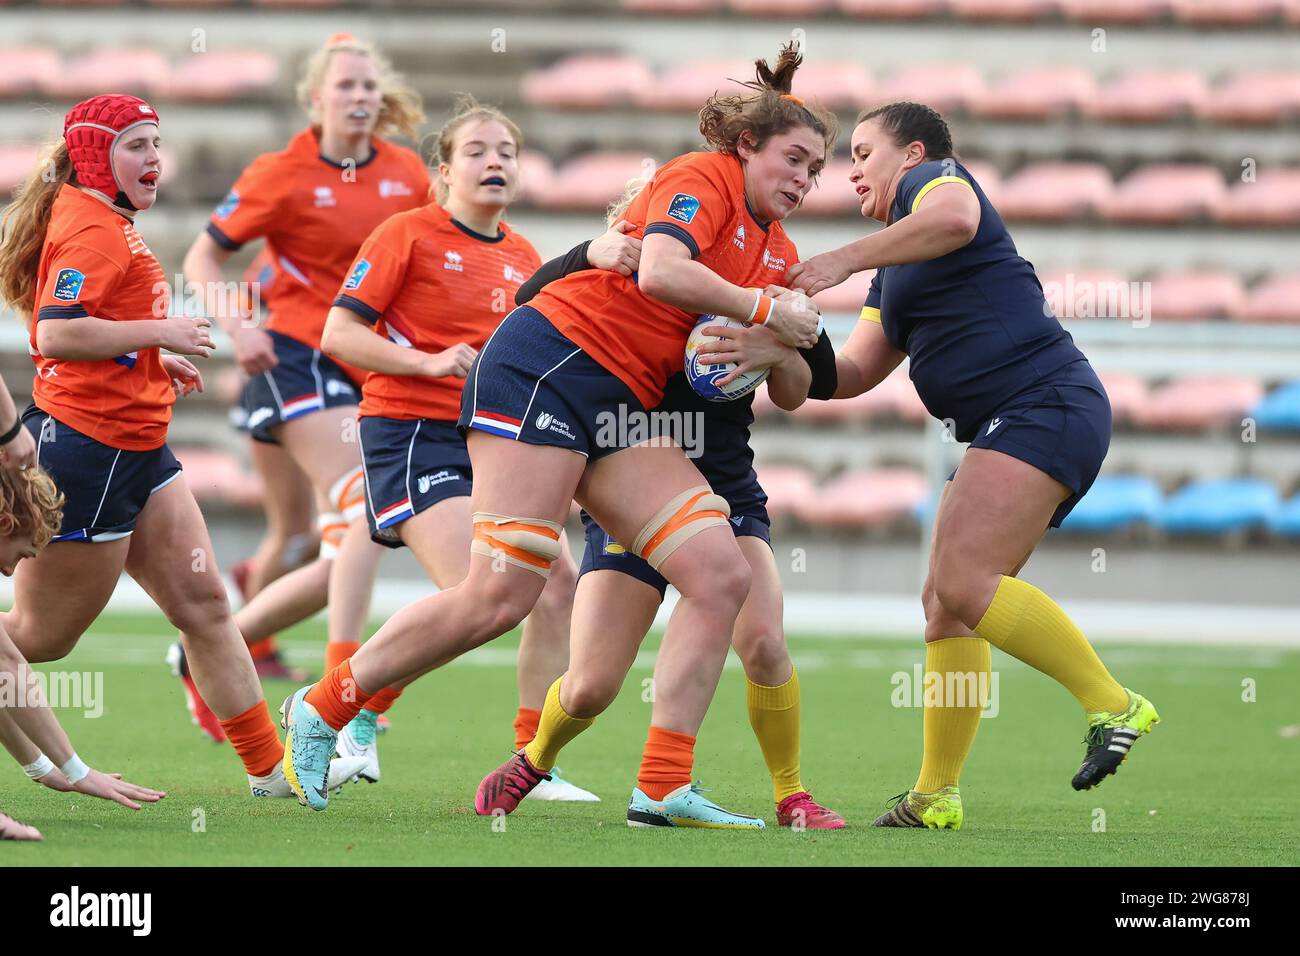 AMSTERDAM, NETHERLANDS - FEBRUARY 03: Anouk Veerkamp player of Hartpury college (GB)  Linde van der Velden player of Exeter Chiefs (GB) during the int Stock Photo